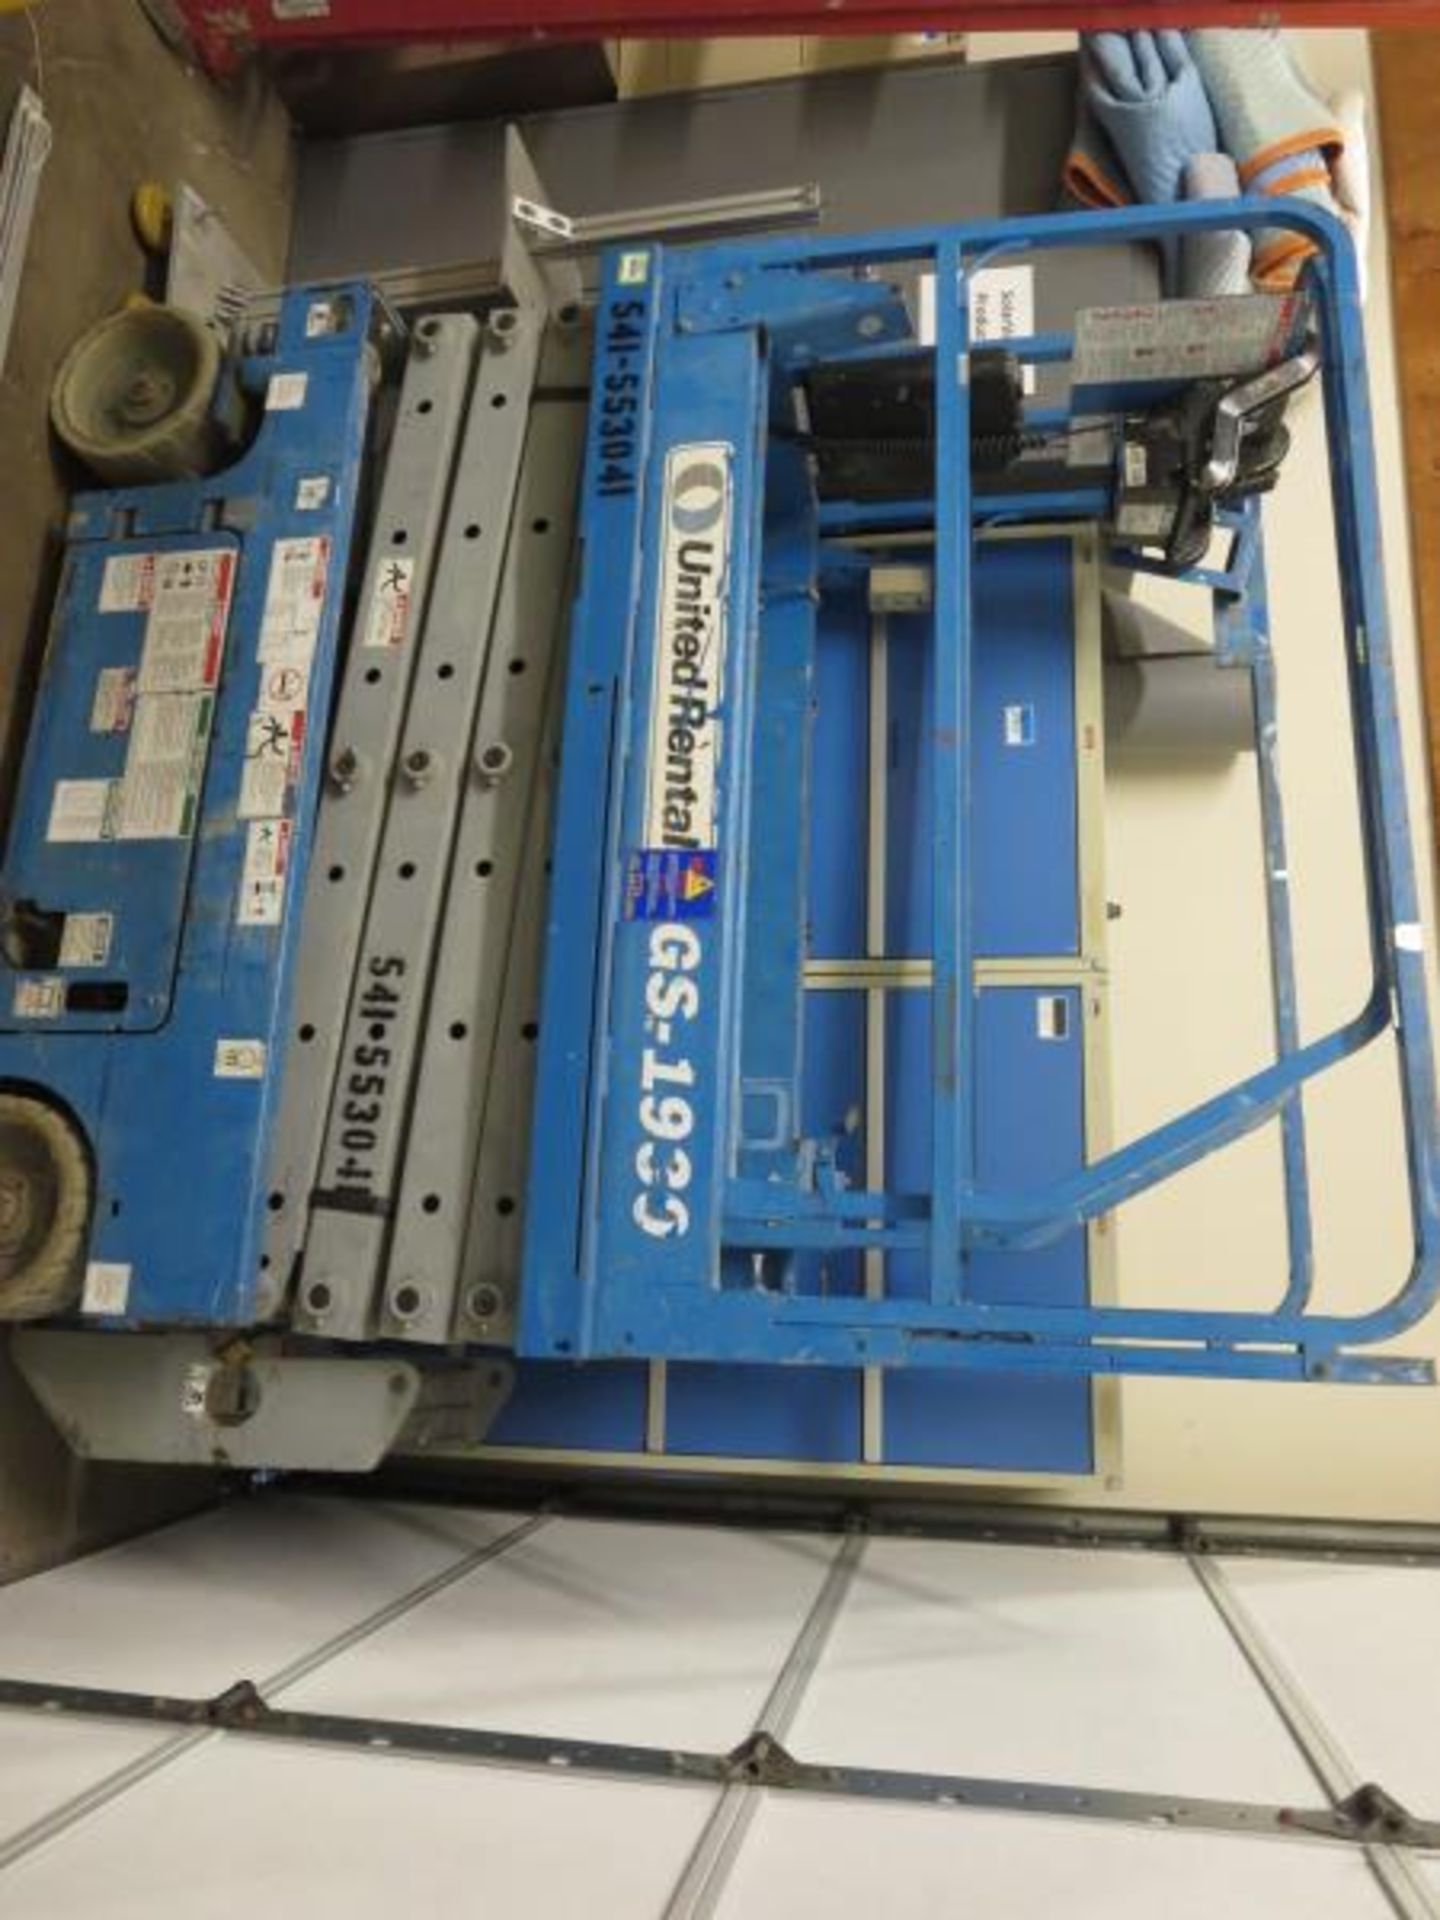 Genie GS-1930 Scissor Lift, 500 lb. capacity, Platform Max. Height 15ft. Max working height 21ft. - Image 2 of 10